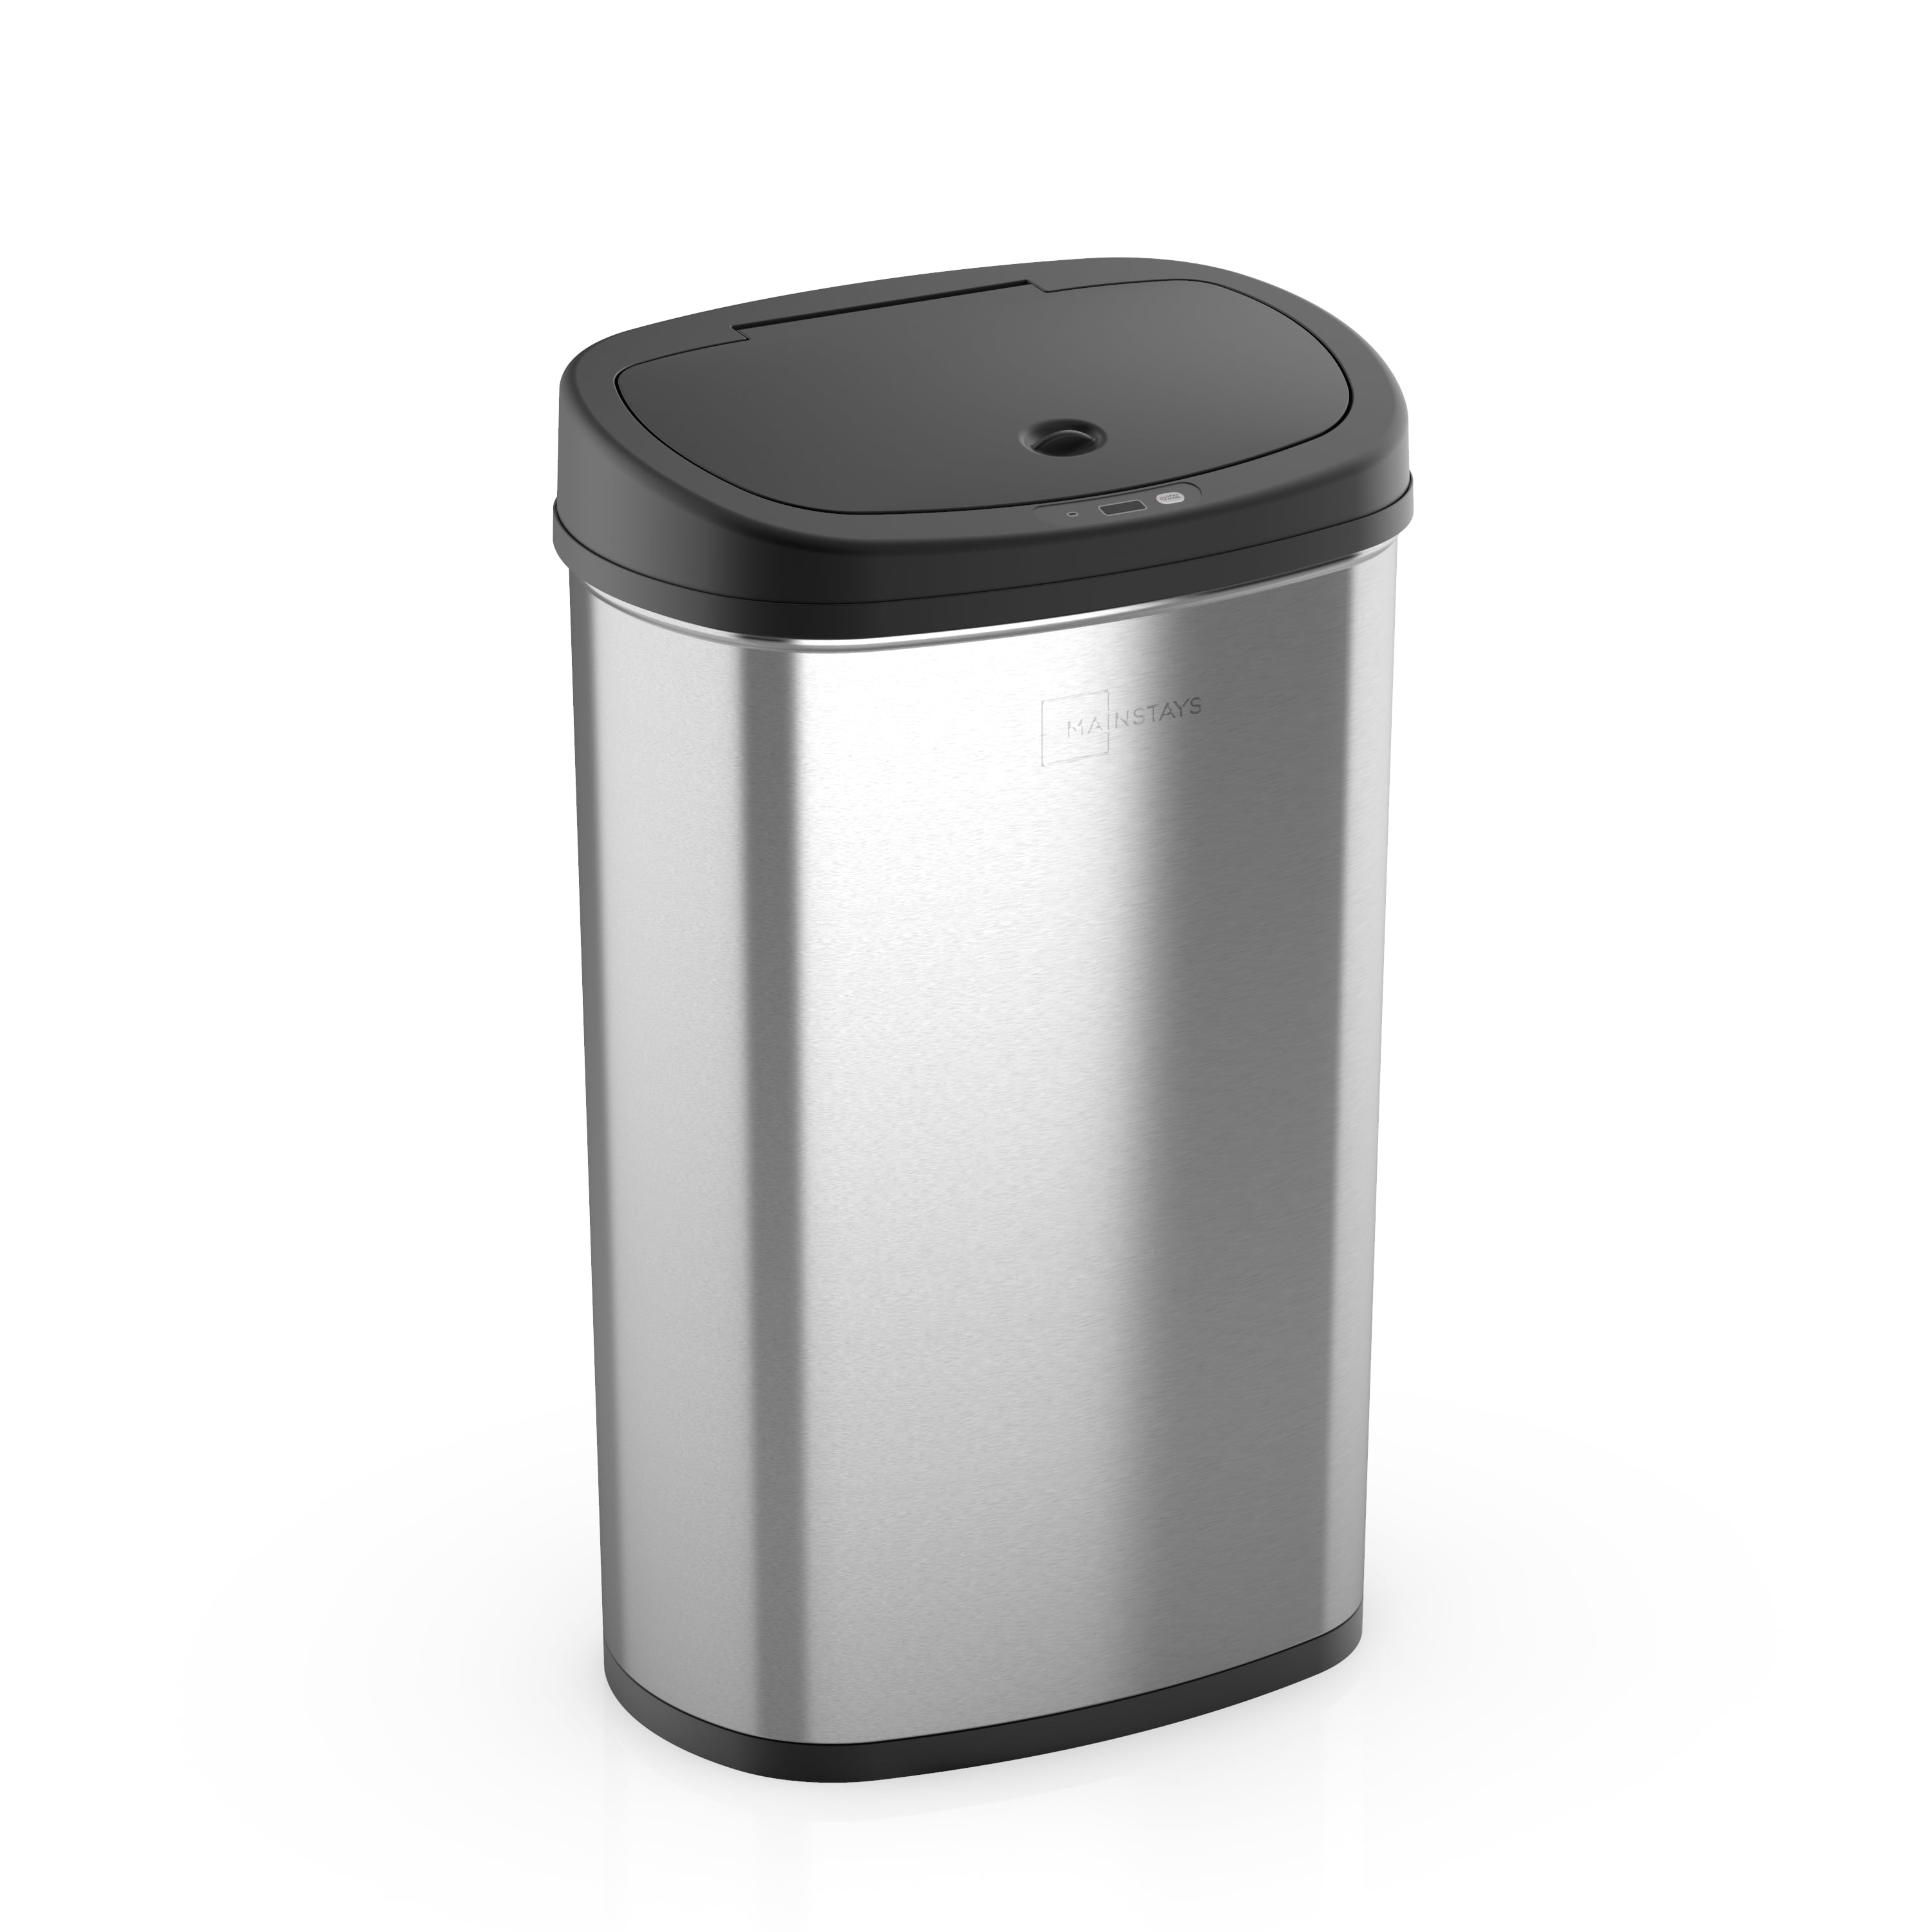 Automatic Touchless Trash Can Garbage Motion Sensor 13 Gallon Waste Basket Room 